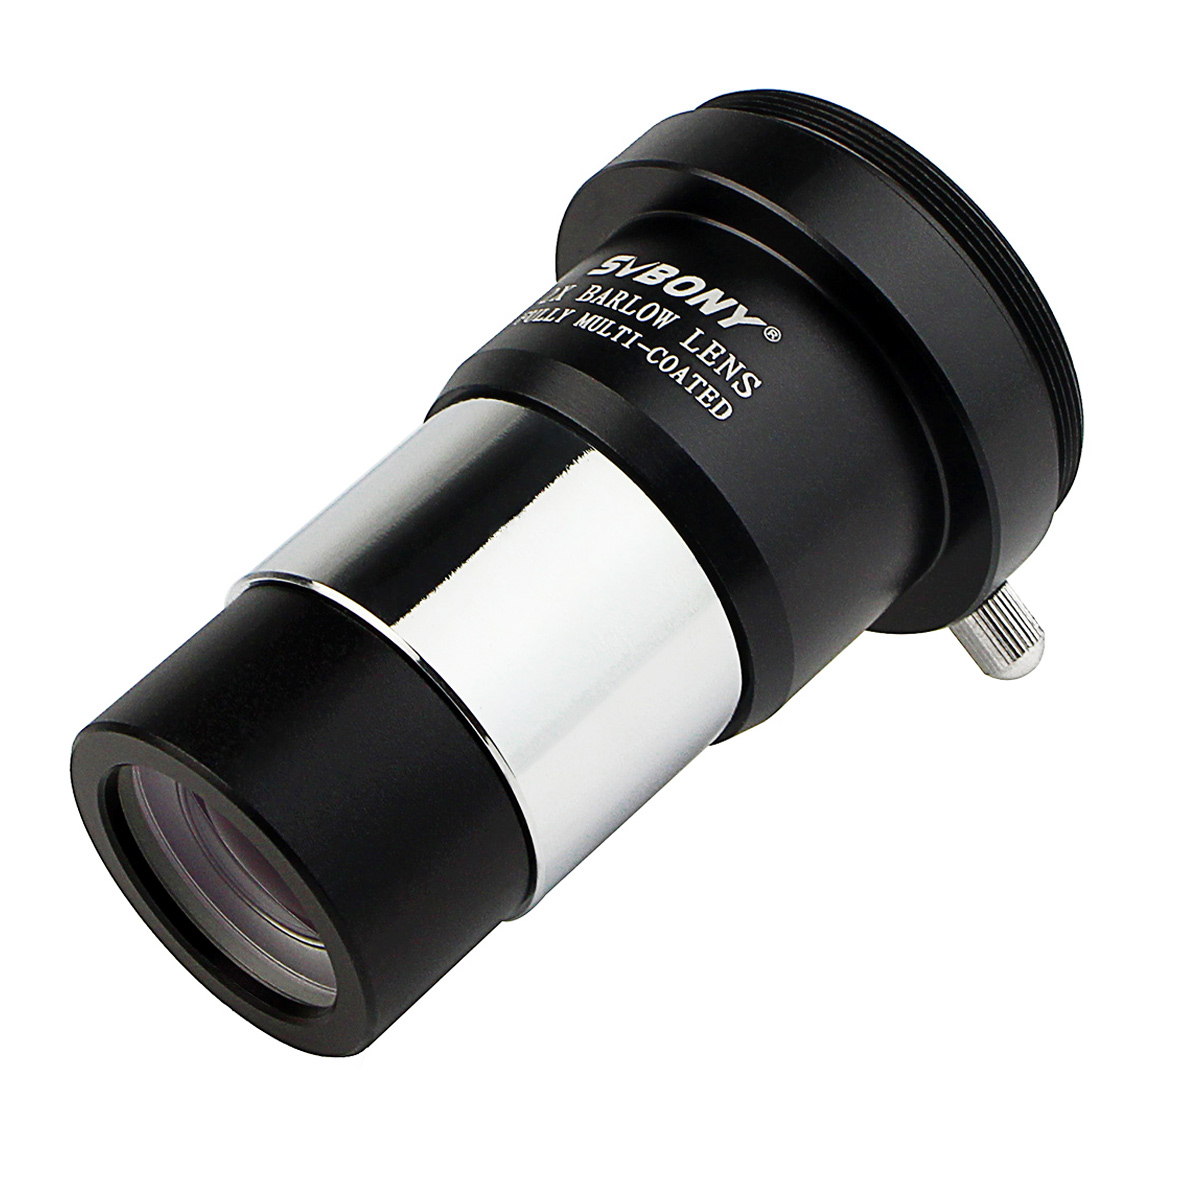 SVBONY 1.25" 2X Barlow Lens Multi-coated All Metal for Standard Telescope Eyepiece Astronomy / T Adapter Double Lens